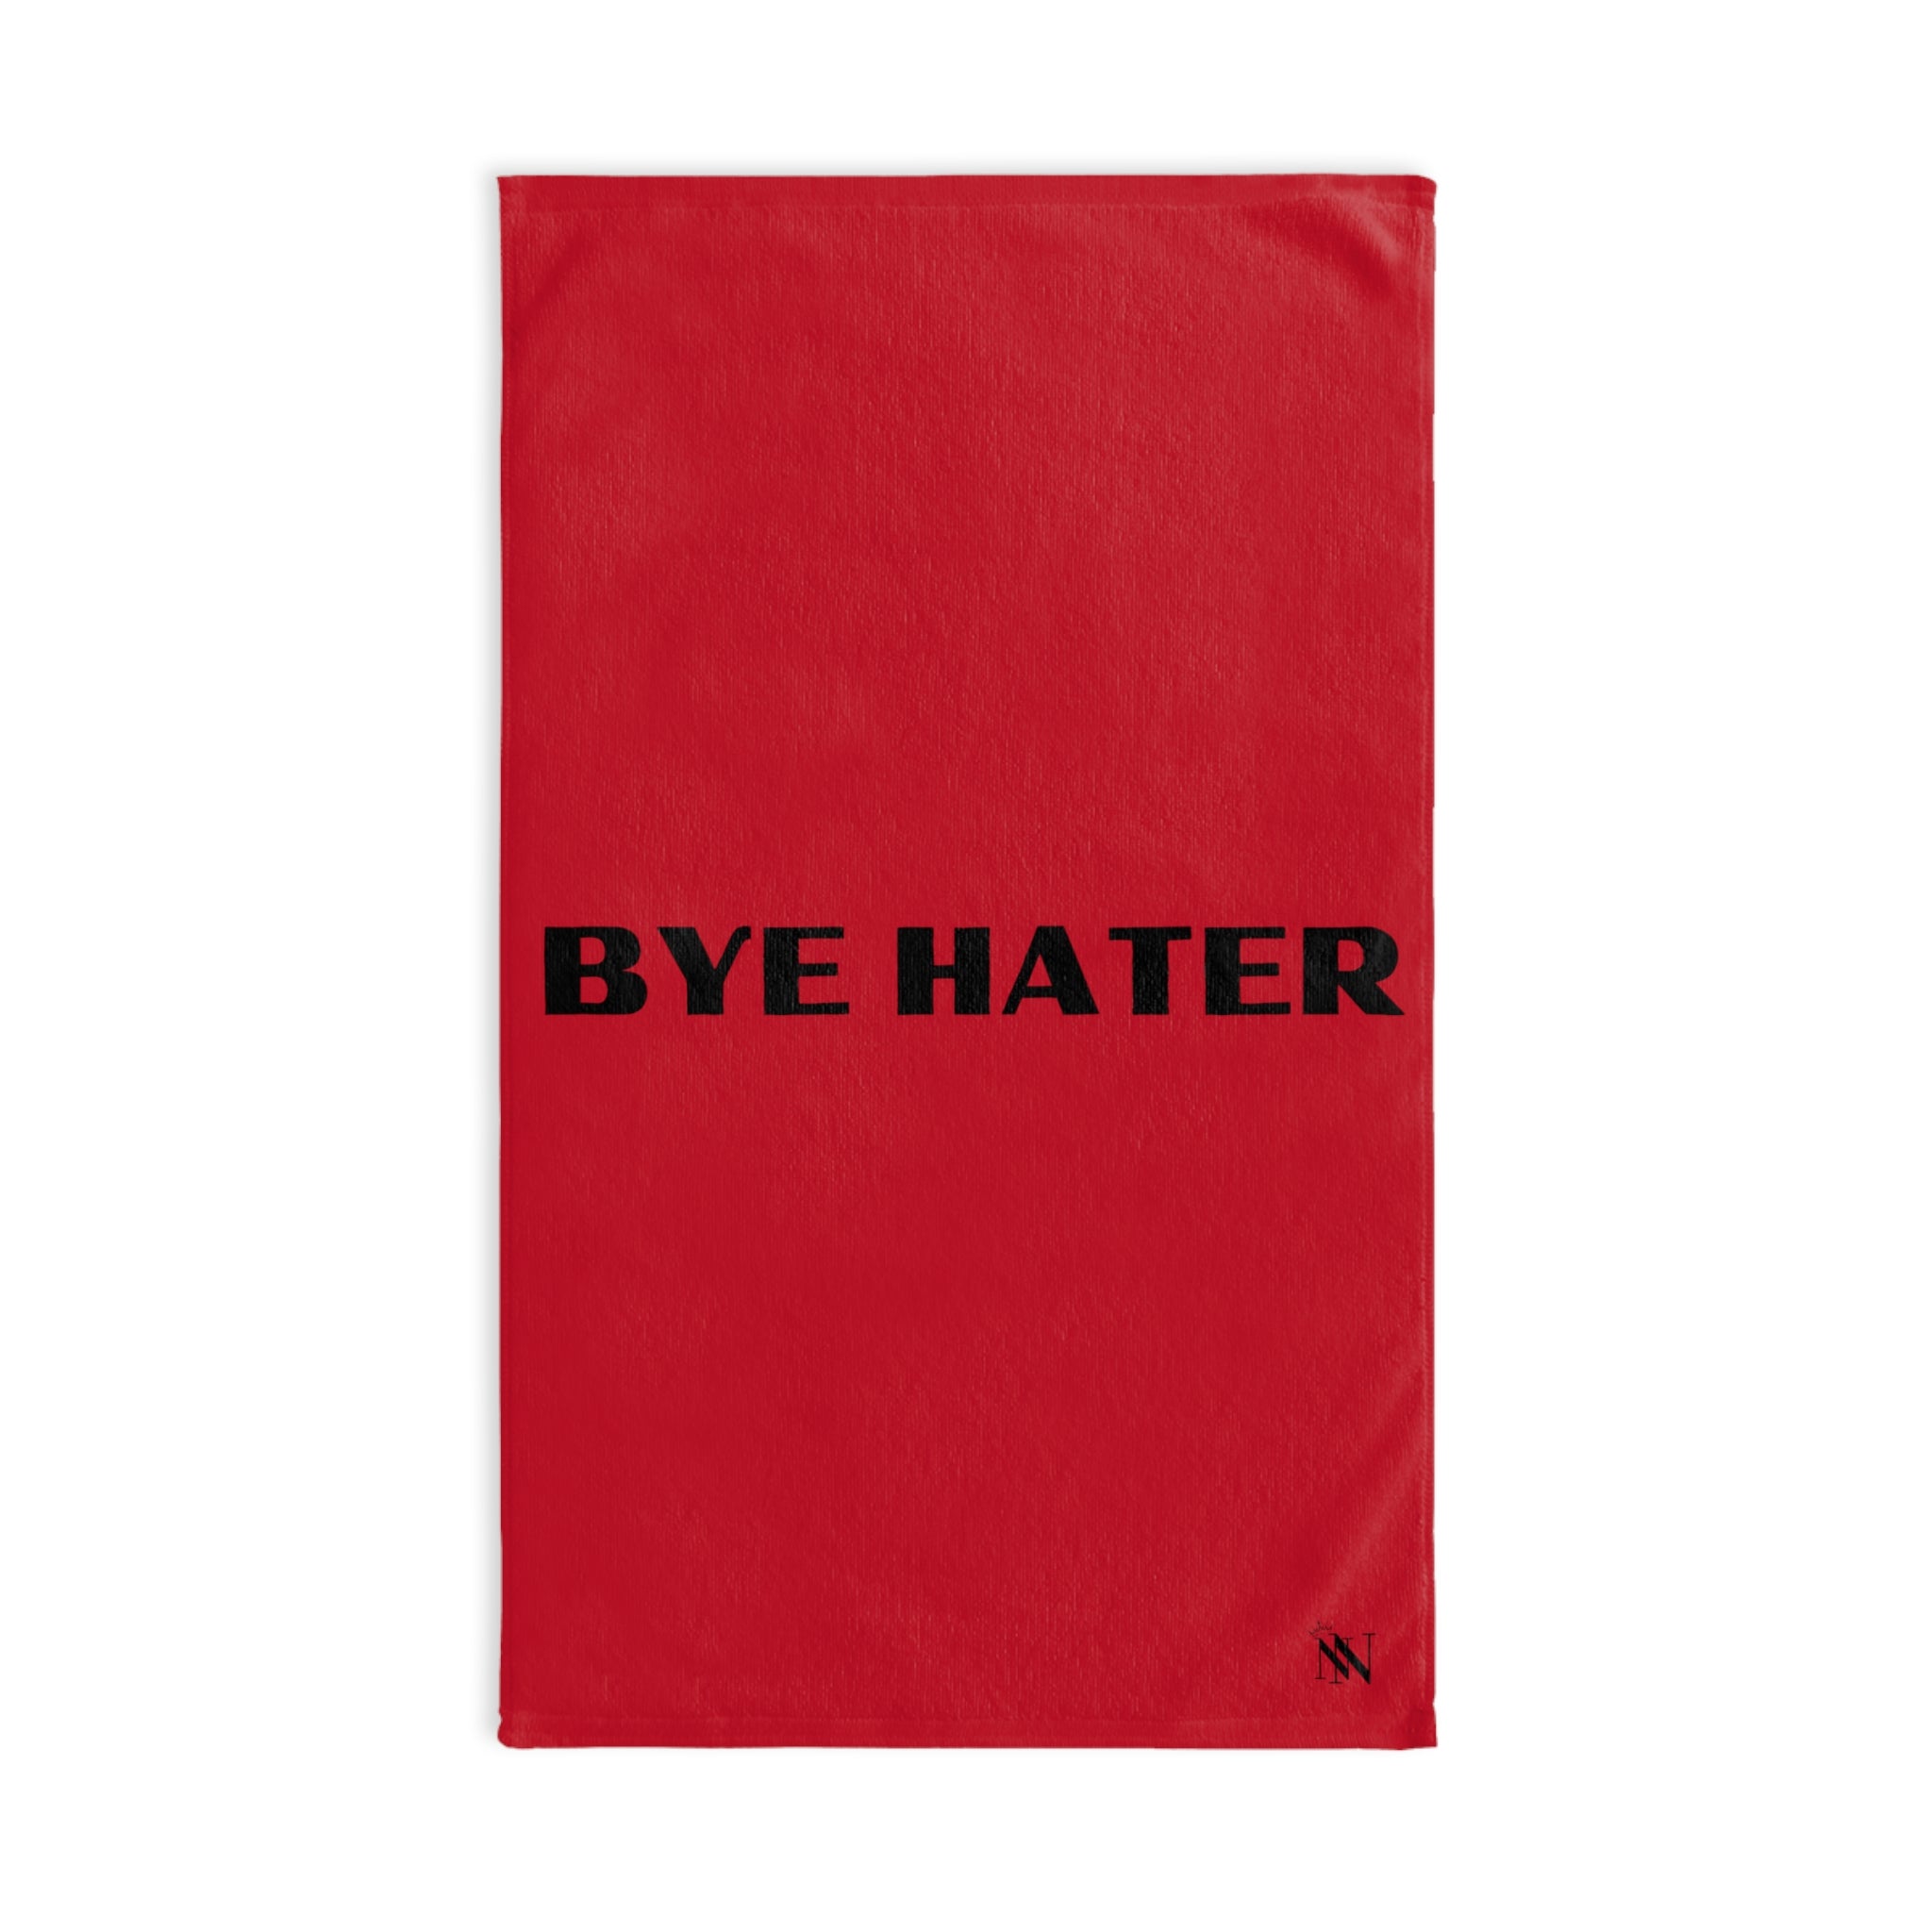 BYE Hater Fun Red | Sexy Gifts for Boyfriend, Funny Towel Romantic Gift for Wedding Couple Fiance First Year 2nd Anniversary Valentines, Party Gag Gifts, Joke Humor Cloth for Husband Men BF NECTAR NAPKINS